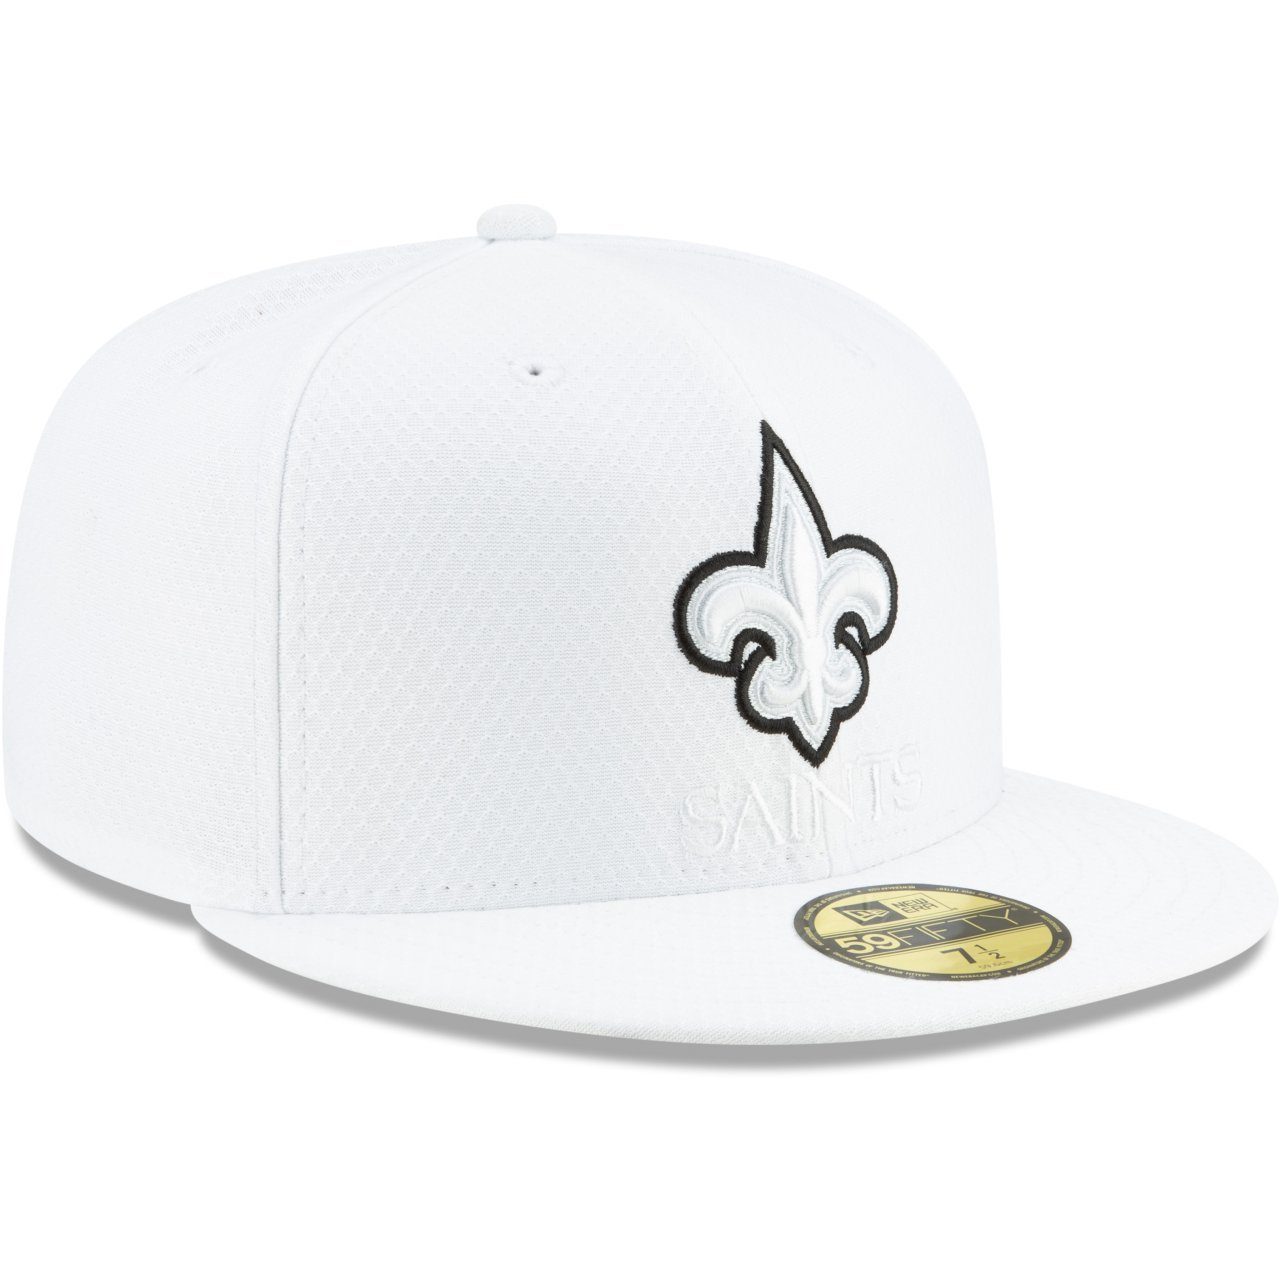 Sideline Era Orleans New Fitted PLATINUM NFL Cap New Saints 59Fifty